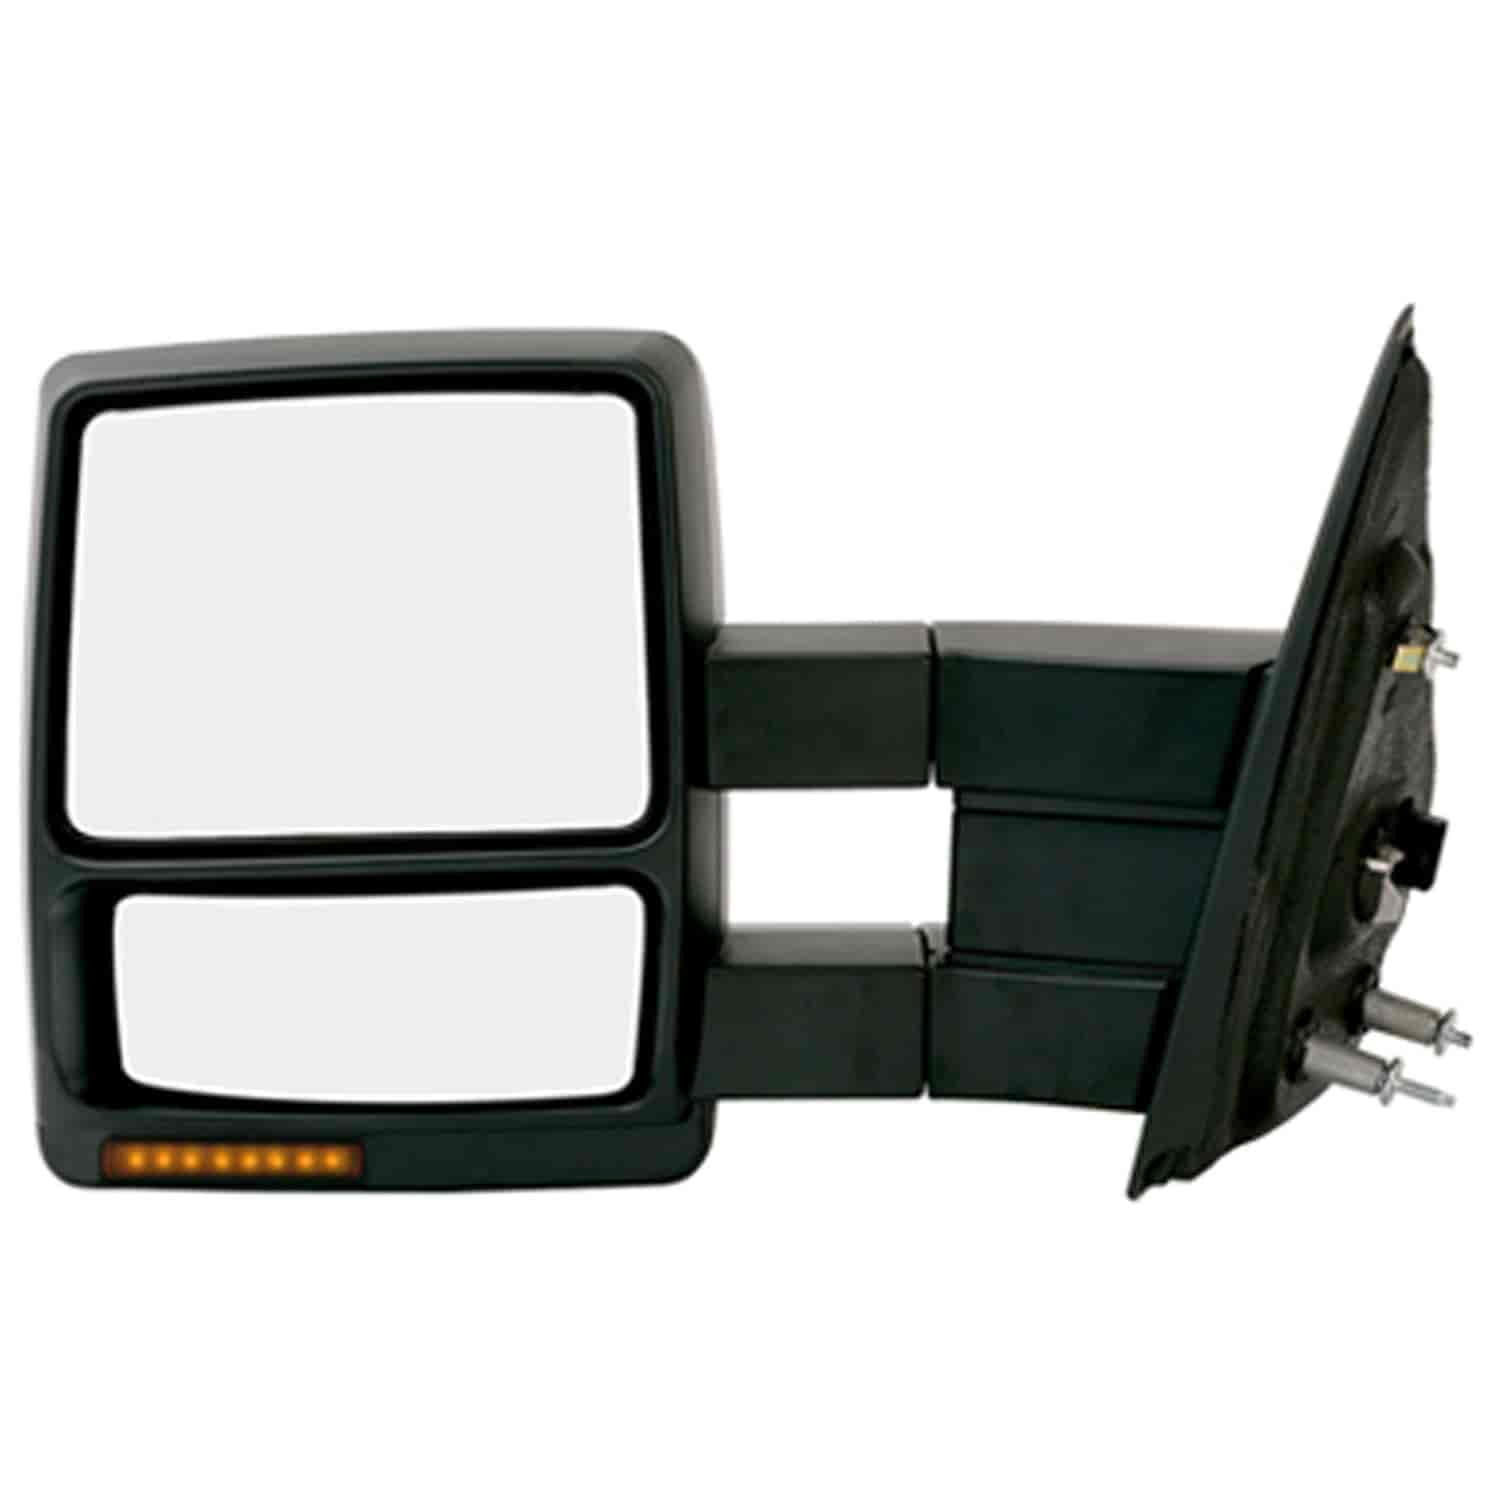 OEM Style Replacement Mirror Fits 2009 to 2012 Ford F150